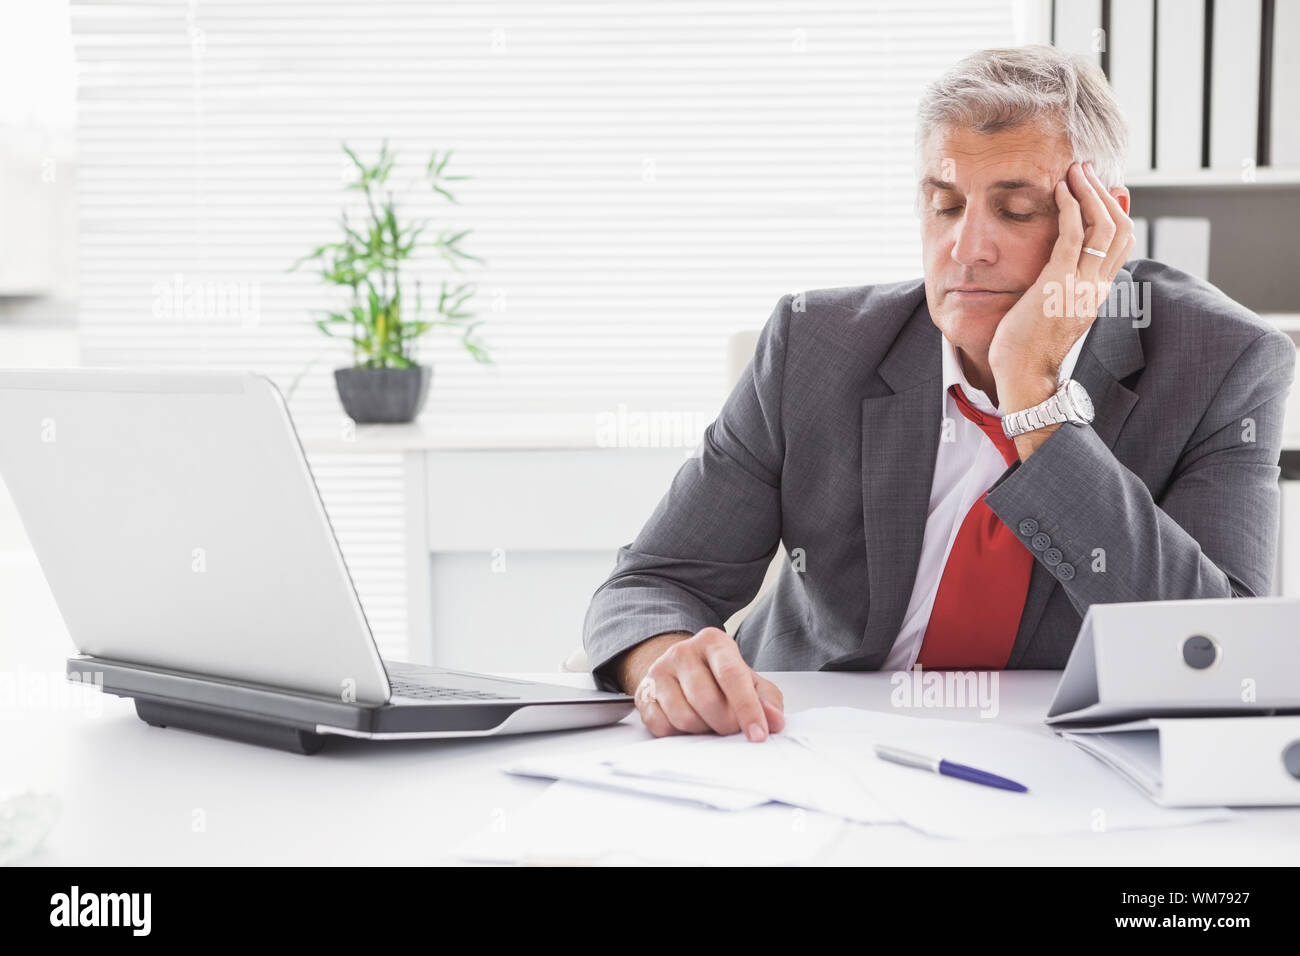 Tired Businessman Falling Asleep At Desk In His Office Stock Photo